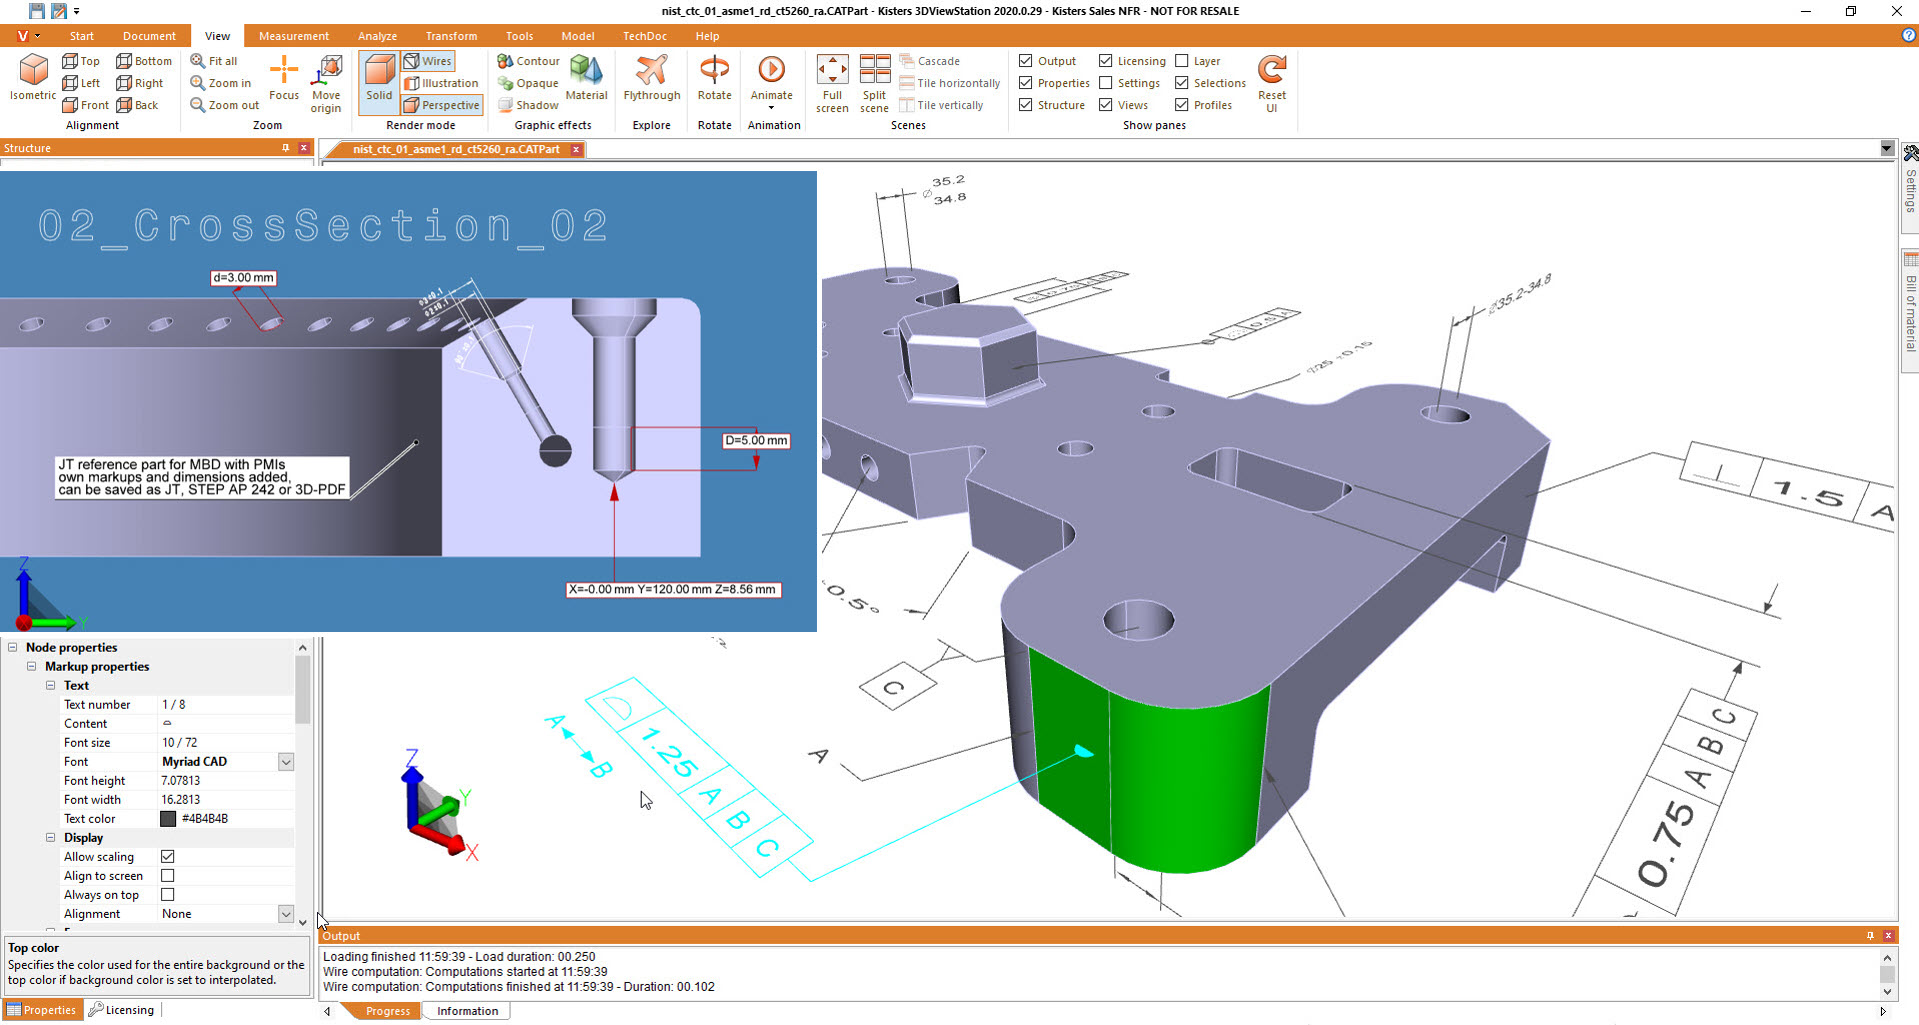 screen capture of KISTERS CAD viewing and markup software which supports model-based definition and collaborative manufacturing.